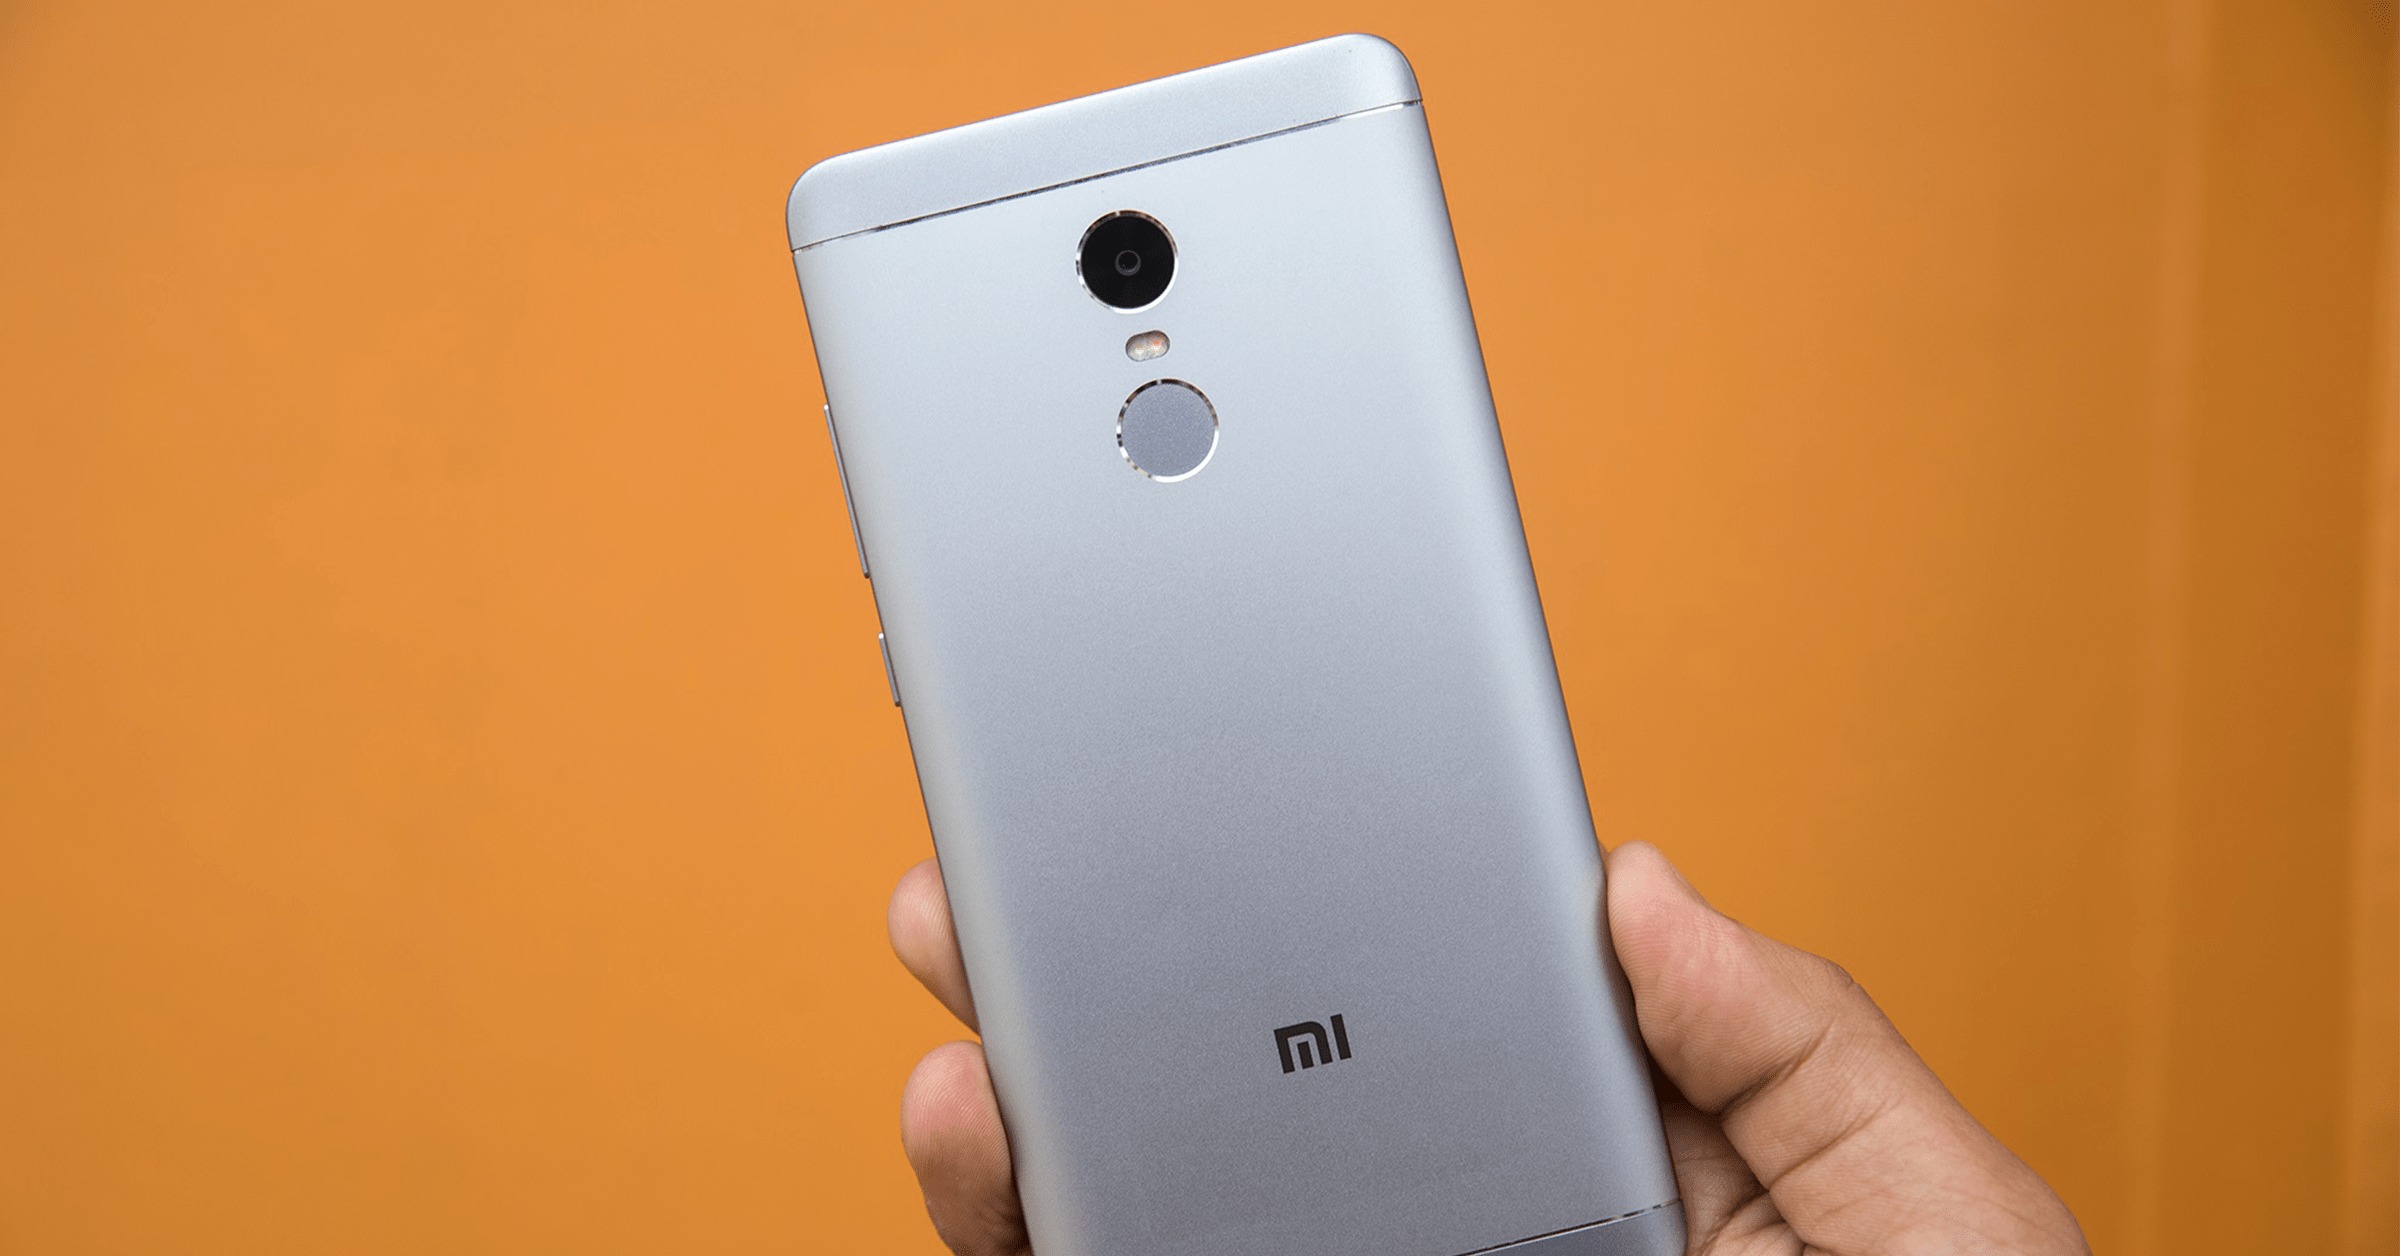 xiaomi-redmi-note-4-how-to-remove-sim-card-without-tool